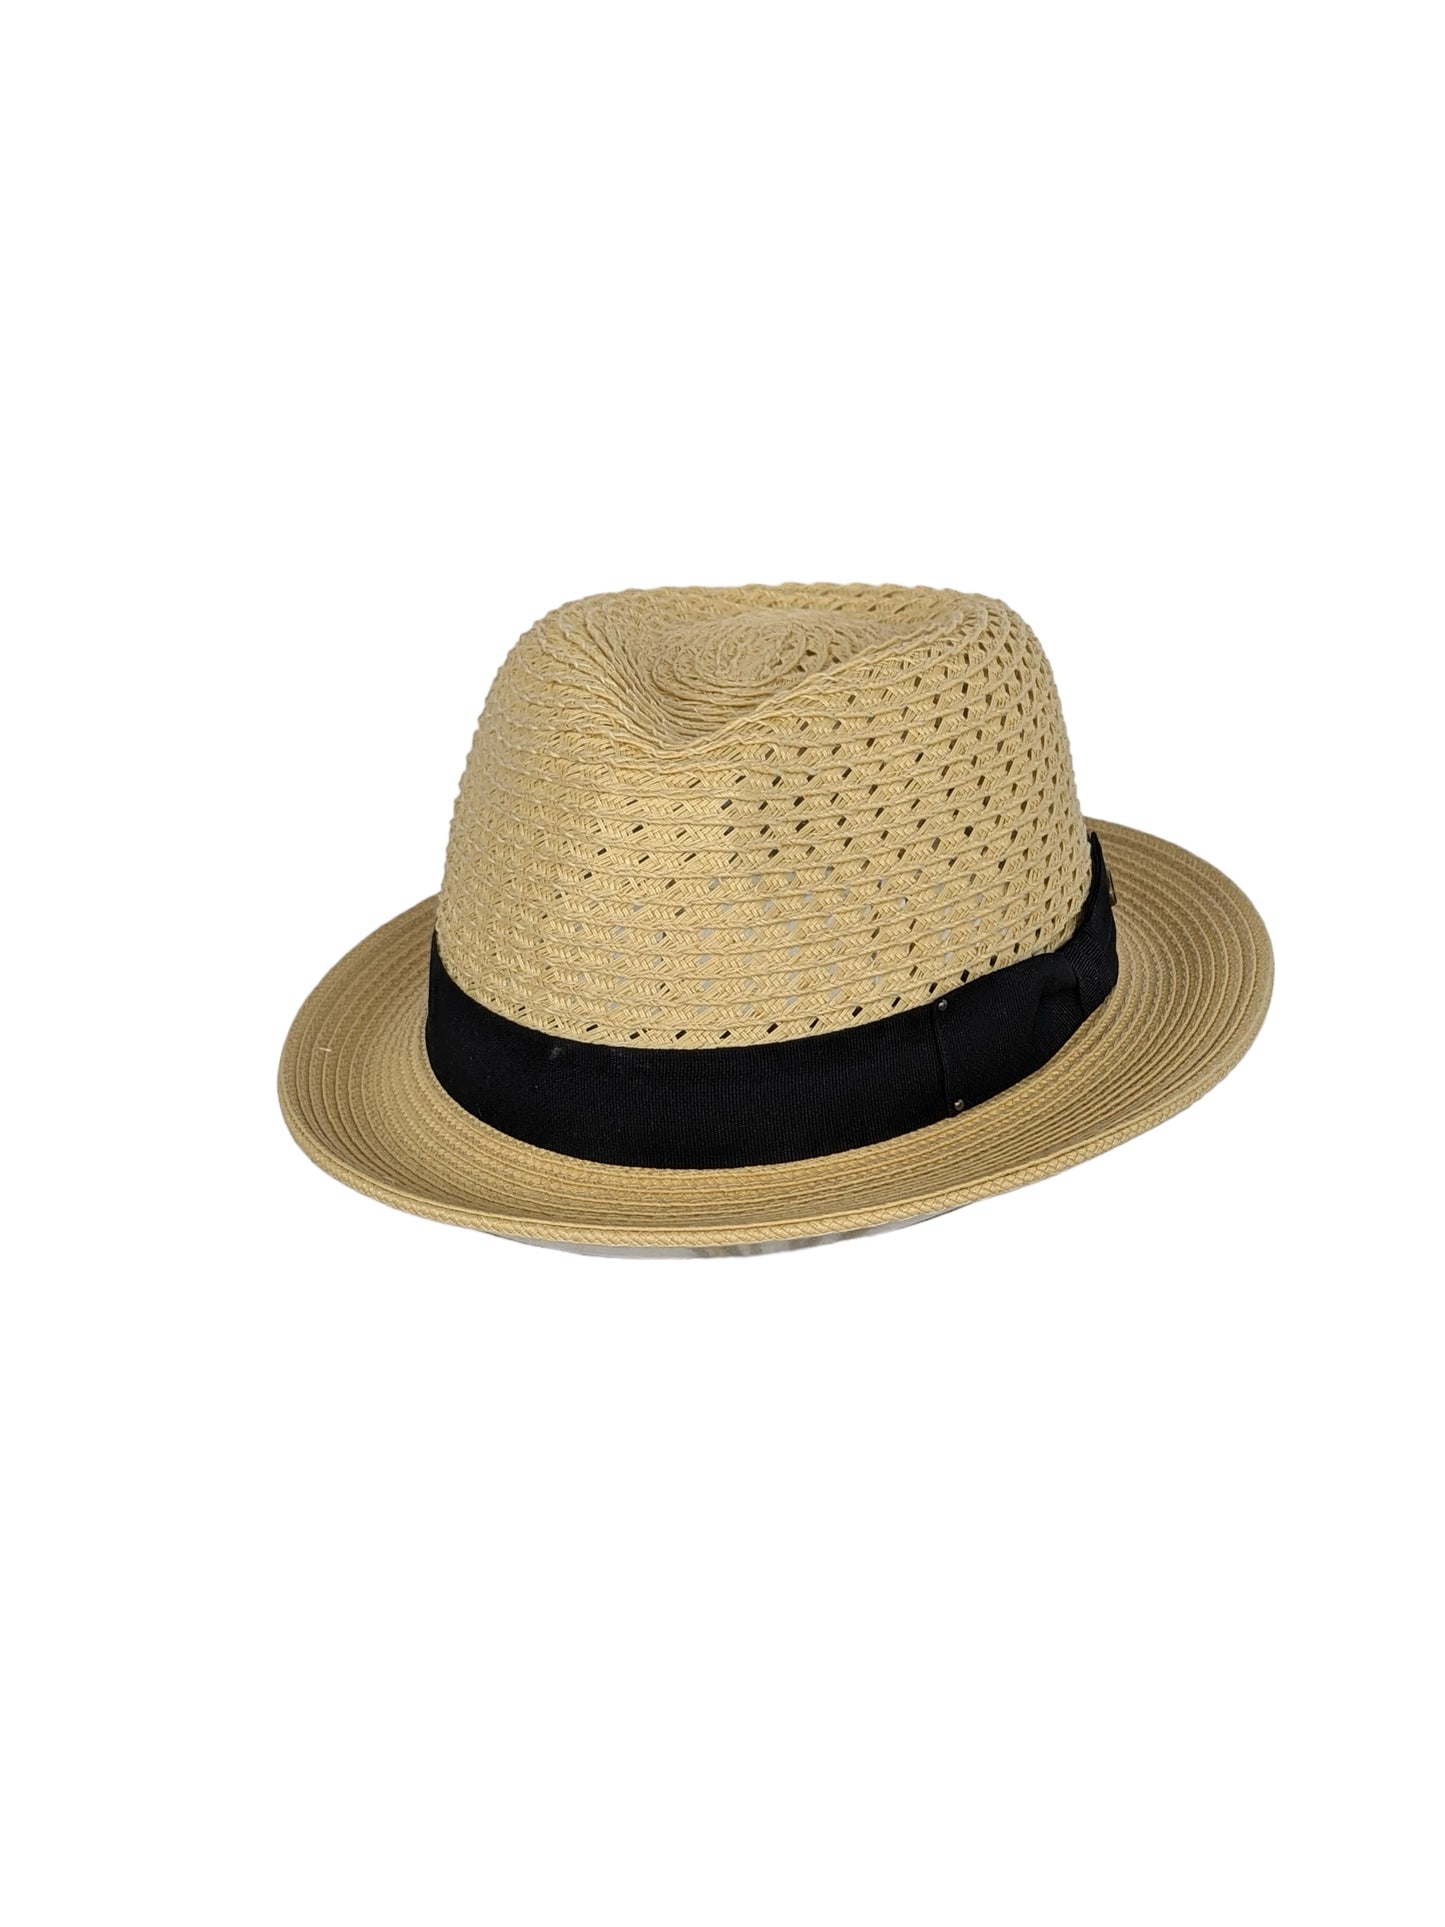 The Carter - Wheat - Men’s Poly Braid Hat